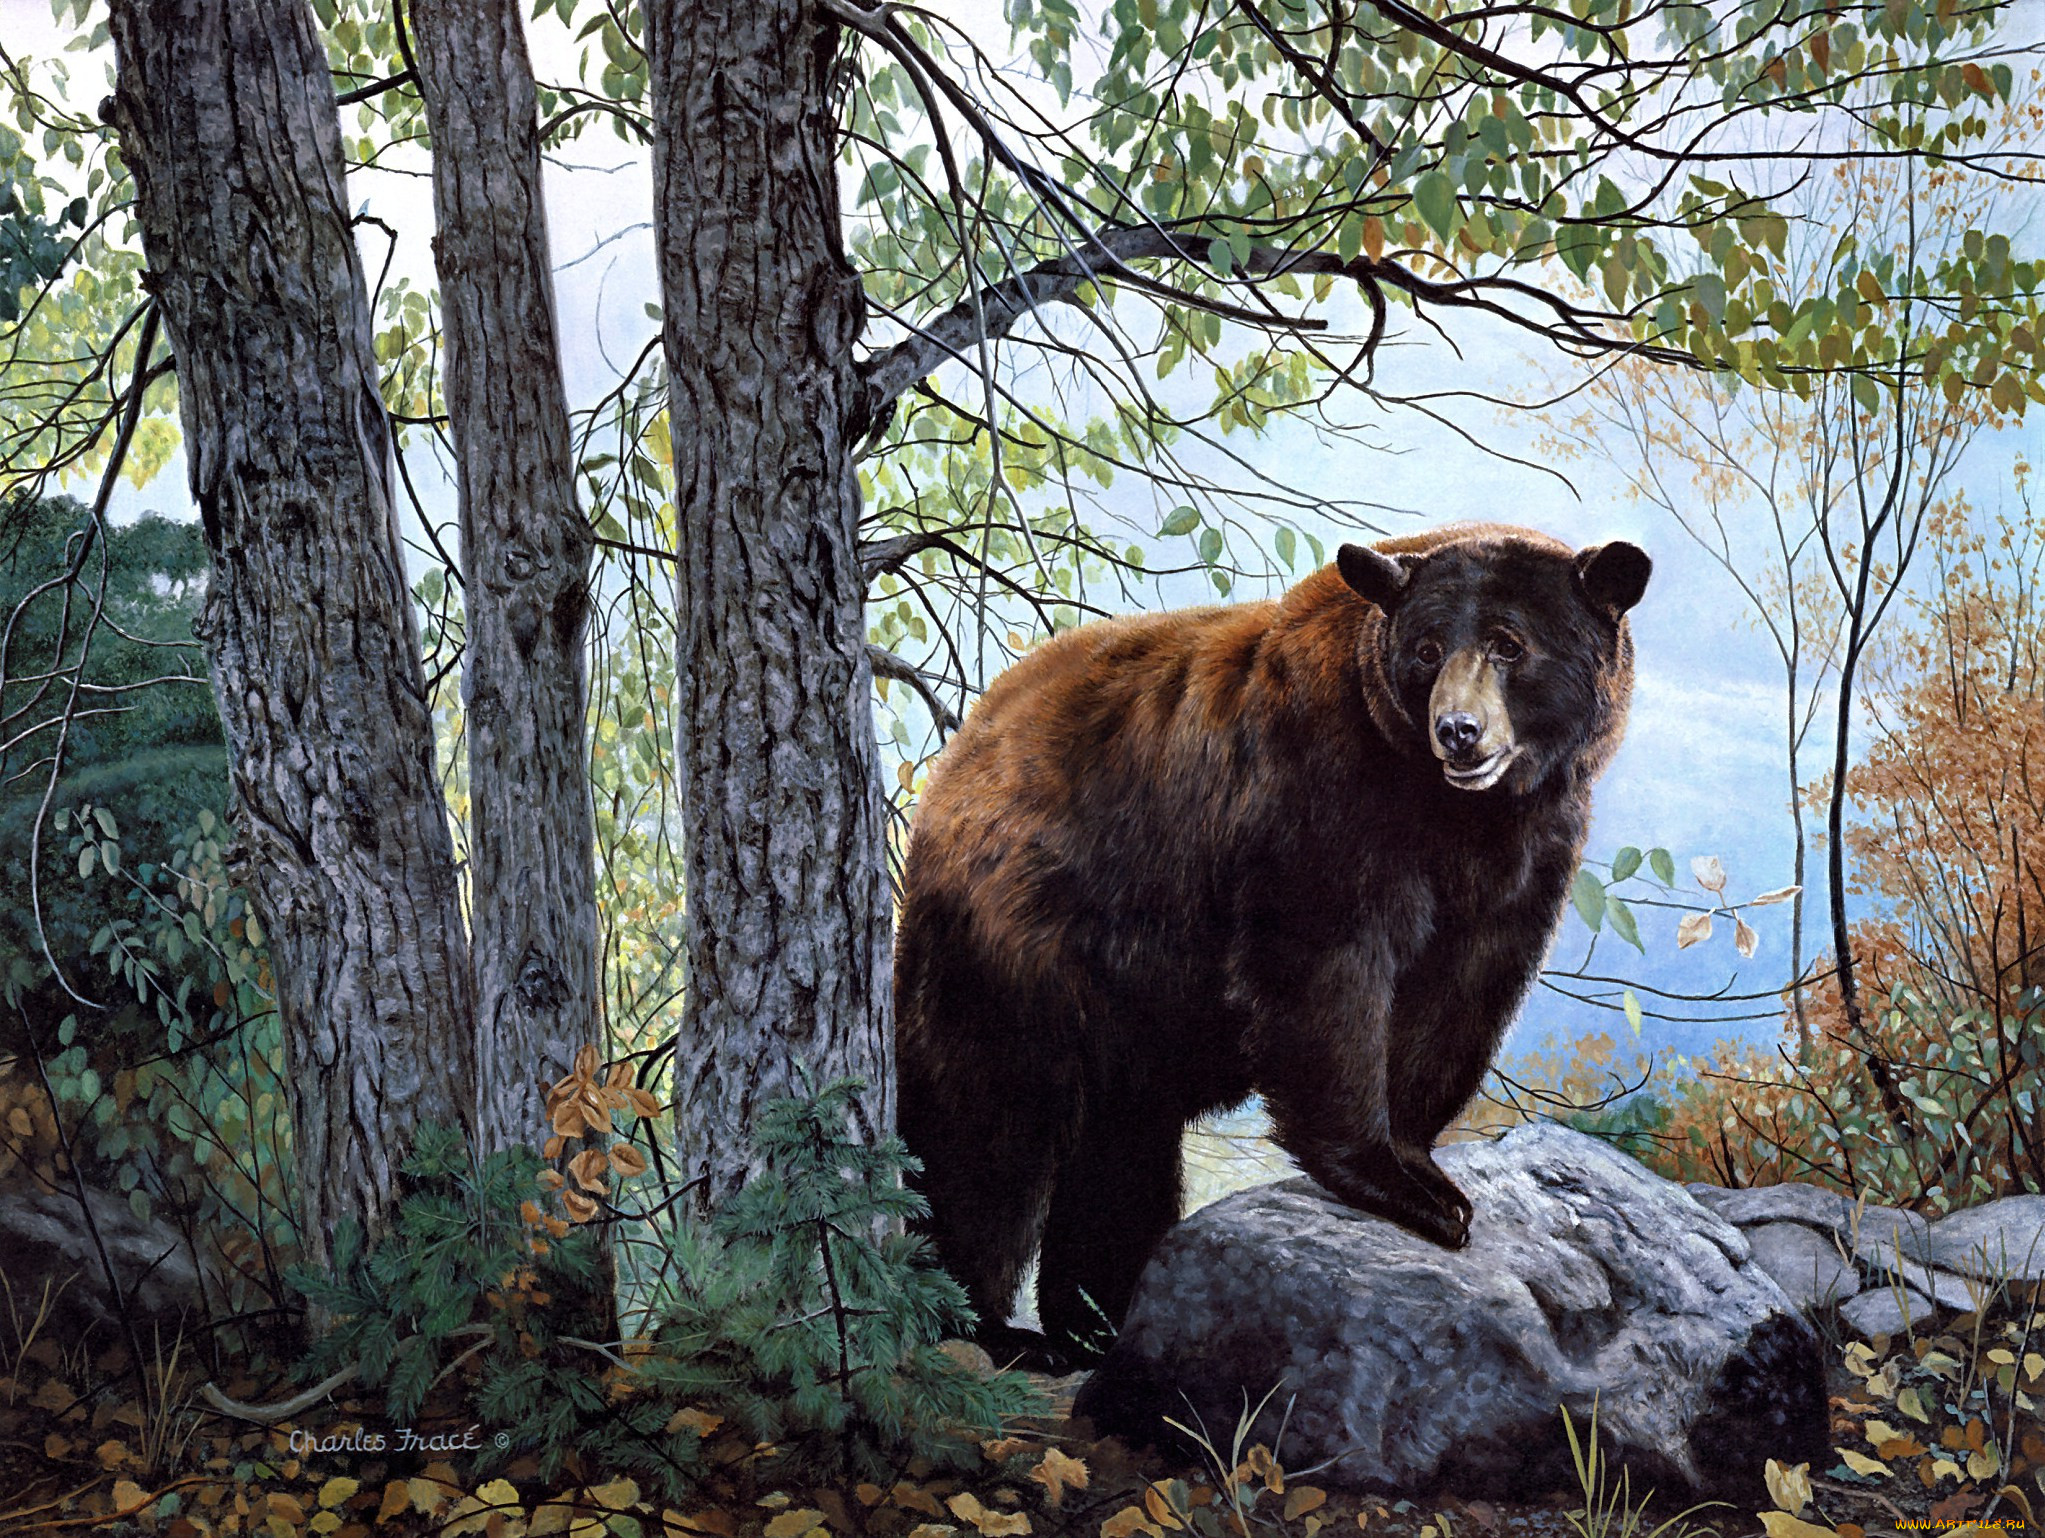 morning, watch, , charles, frace, painting, bear, forest, nature